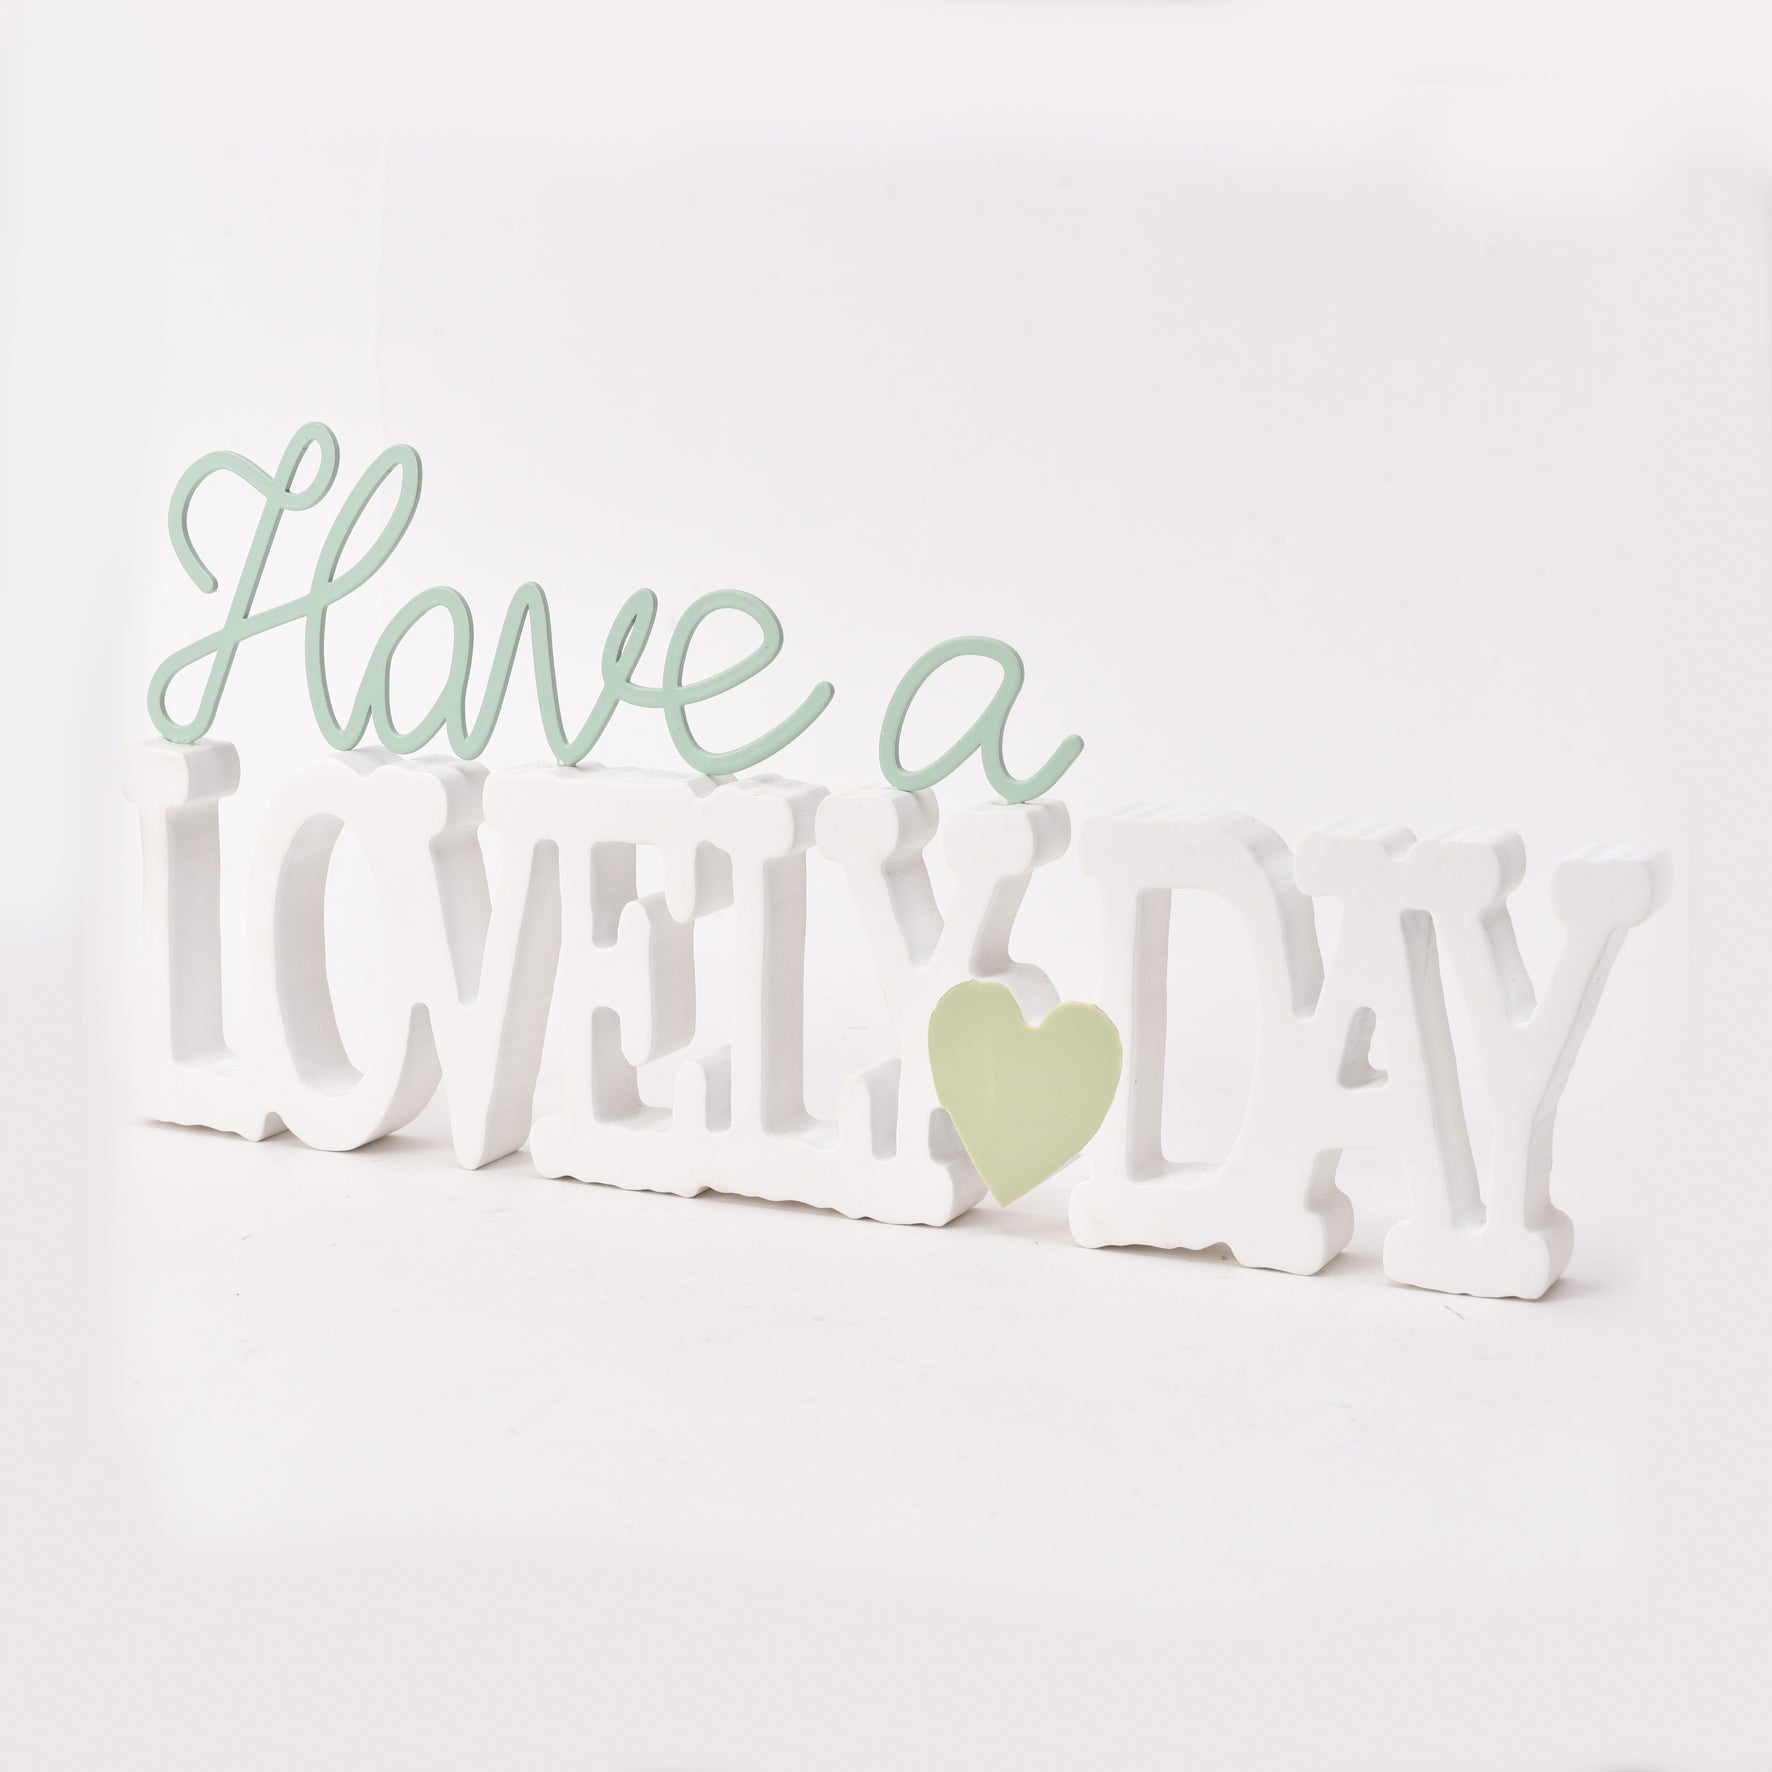 'Lovely Day' Mantel Plaque - Have A Lovely Day